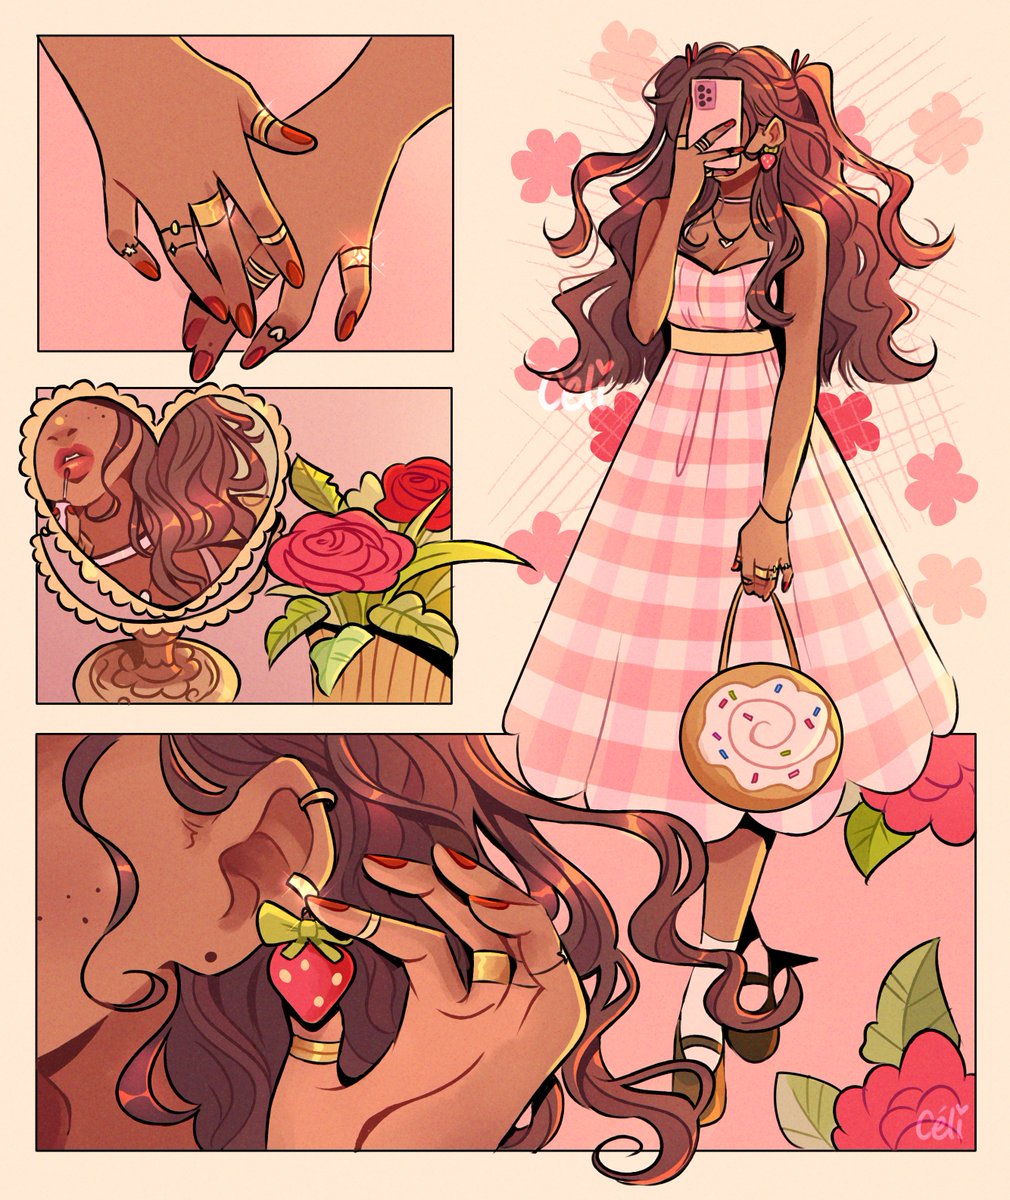 hiya #PortfolioDay !! 💞🍓☀
i'm céli, a freelance illustrator and comic colorist looking for fun projects and job opportunities in the industry (advertising, comics, books, games, animation) ! i enjoy exploring magical worlds through color and design~✨ 